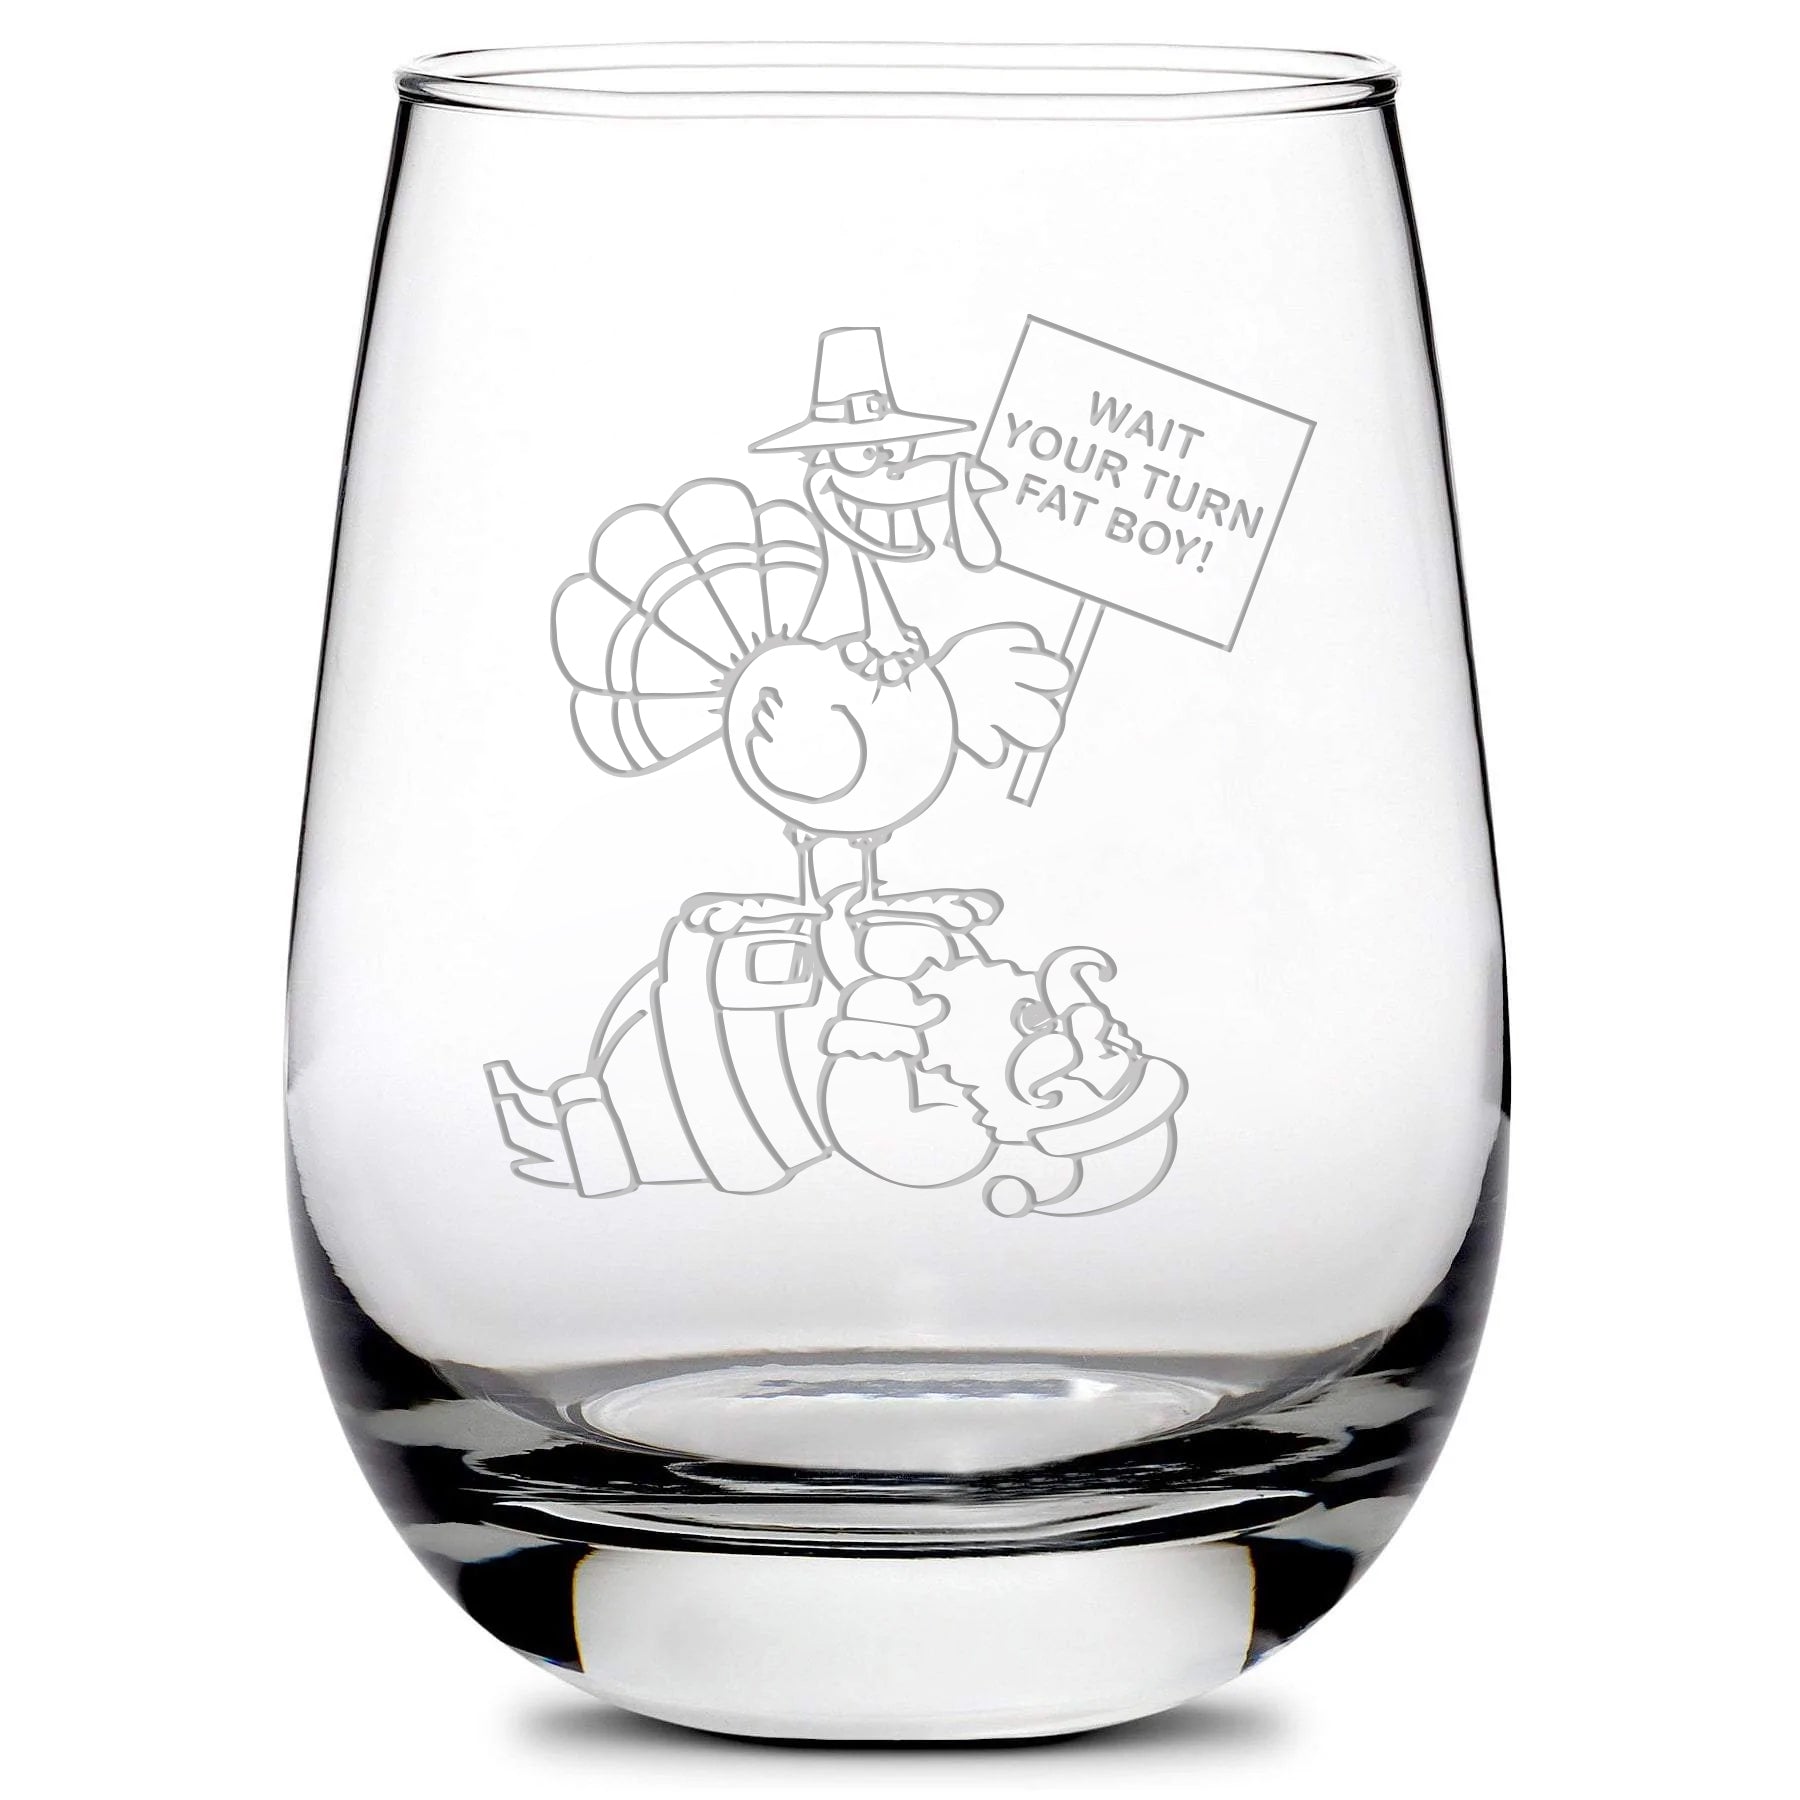 Wait Your Turn, Premium Stemless Wine Glass, Laser Etched or Hand Etched, Made in USA, 16oz